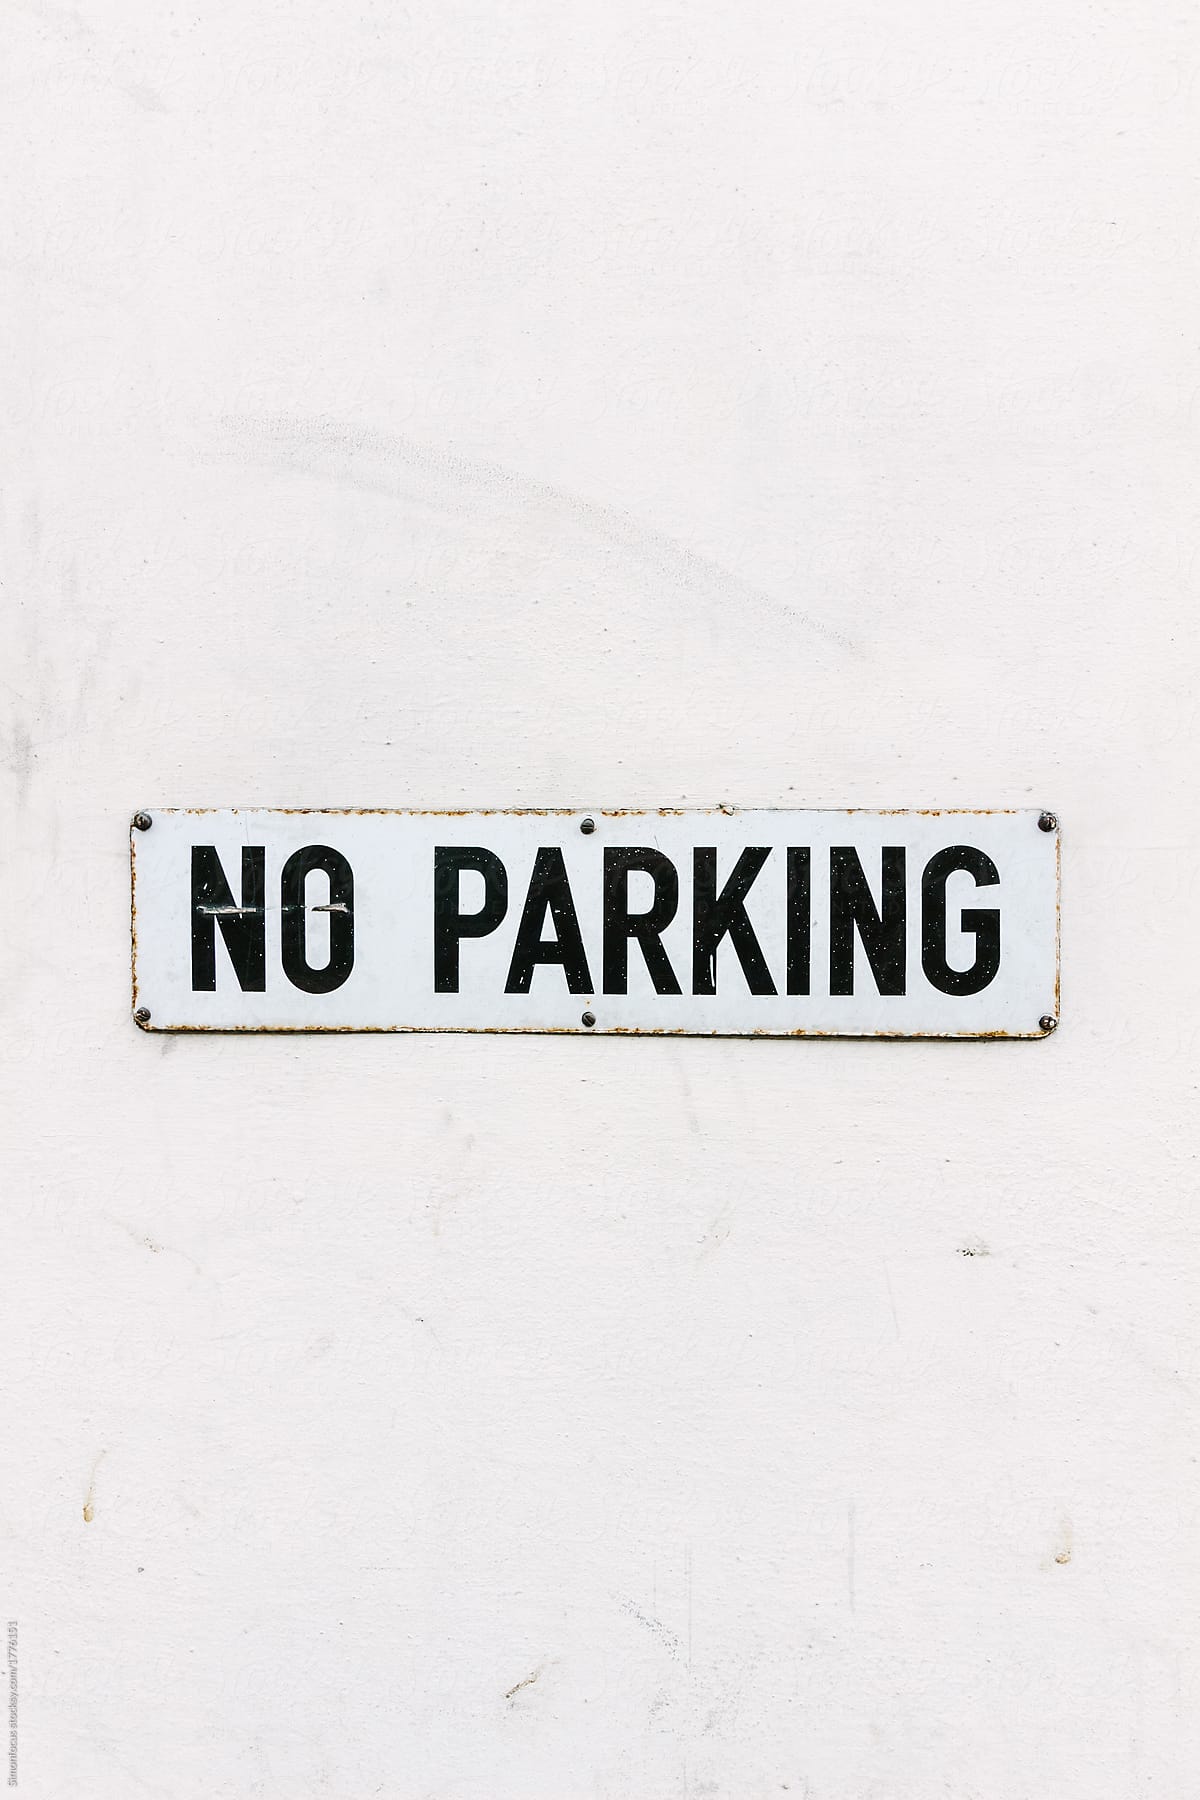 Old No Parking sign in London